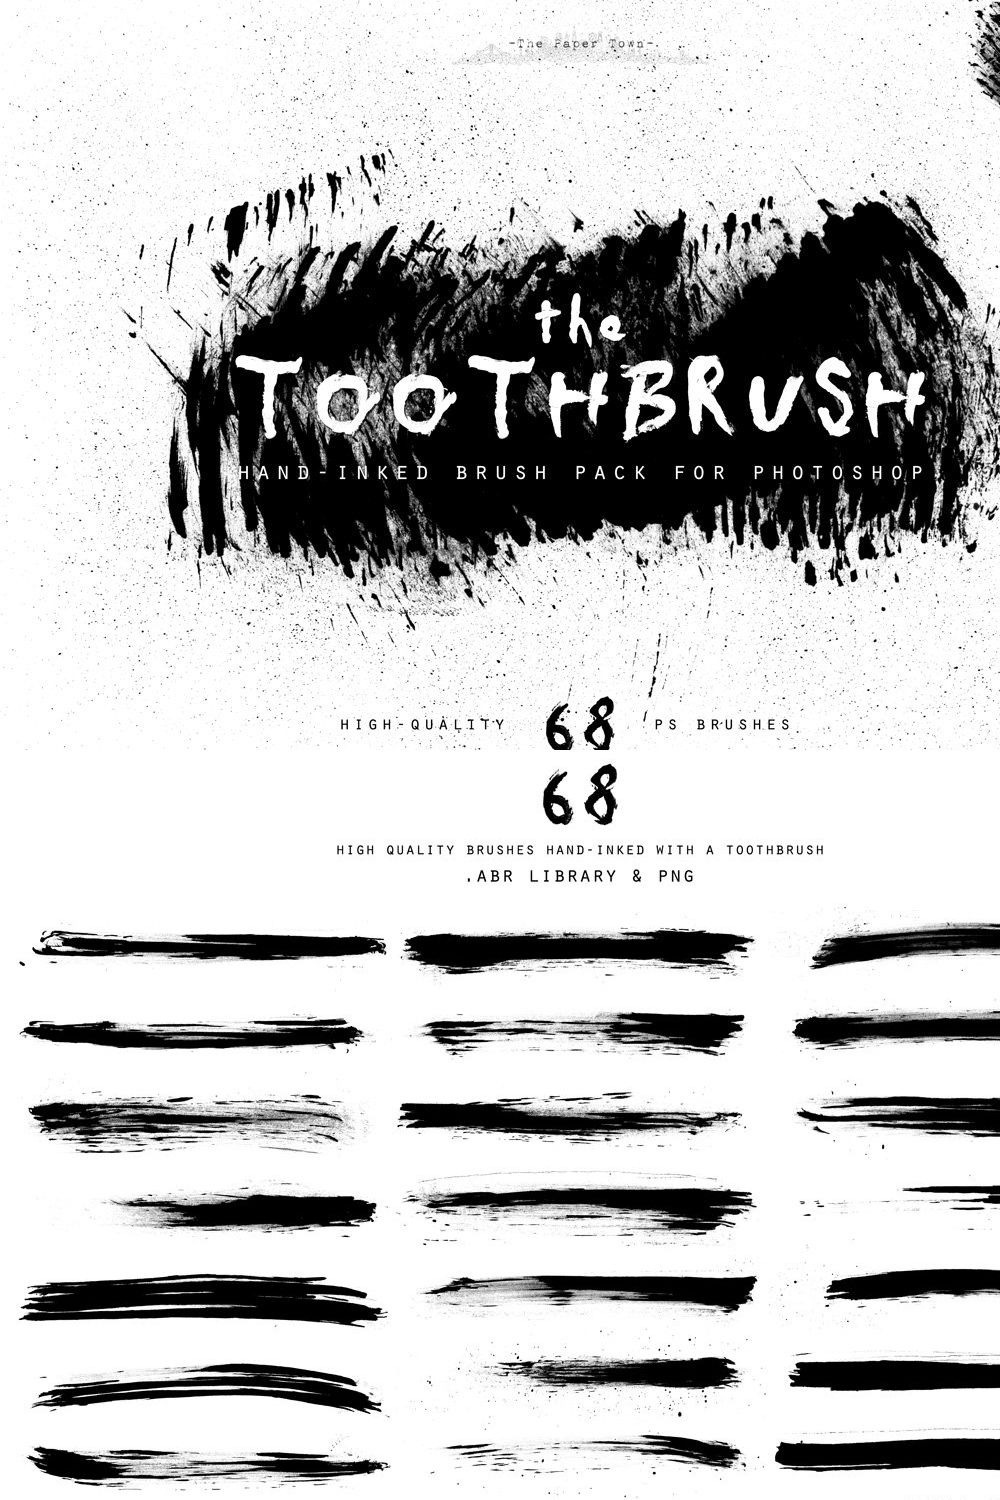 Hand-Inked ToothBrush PS Brushes pinterest preview image.